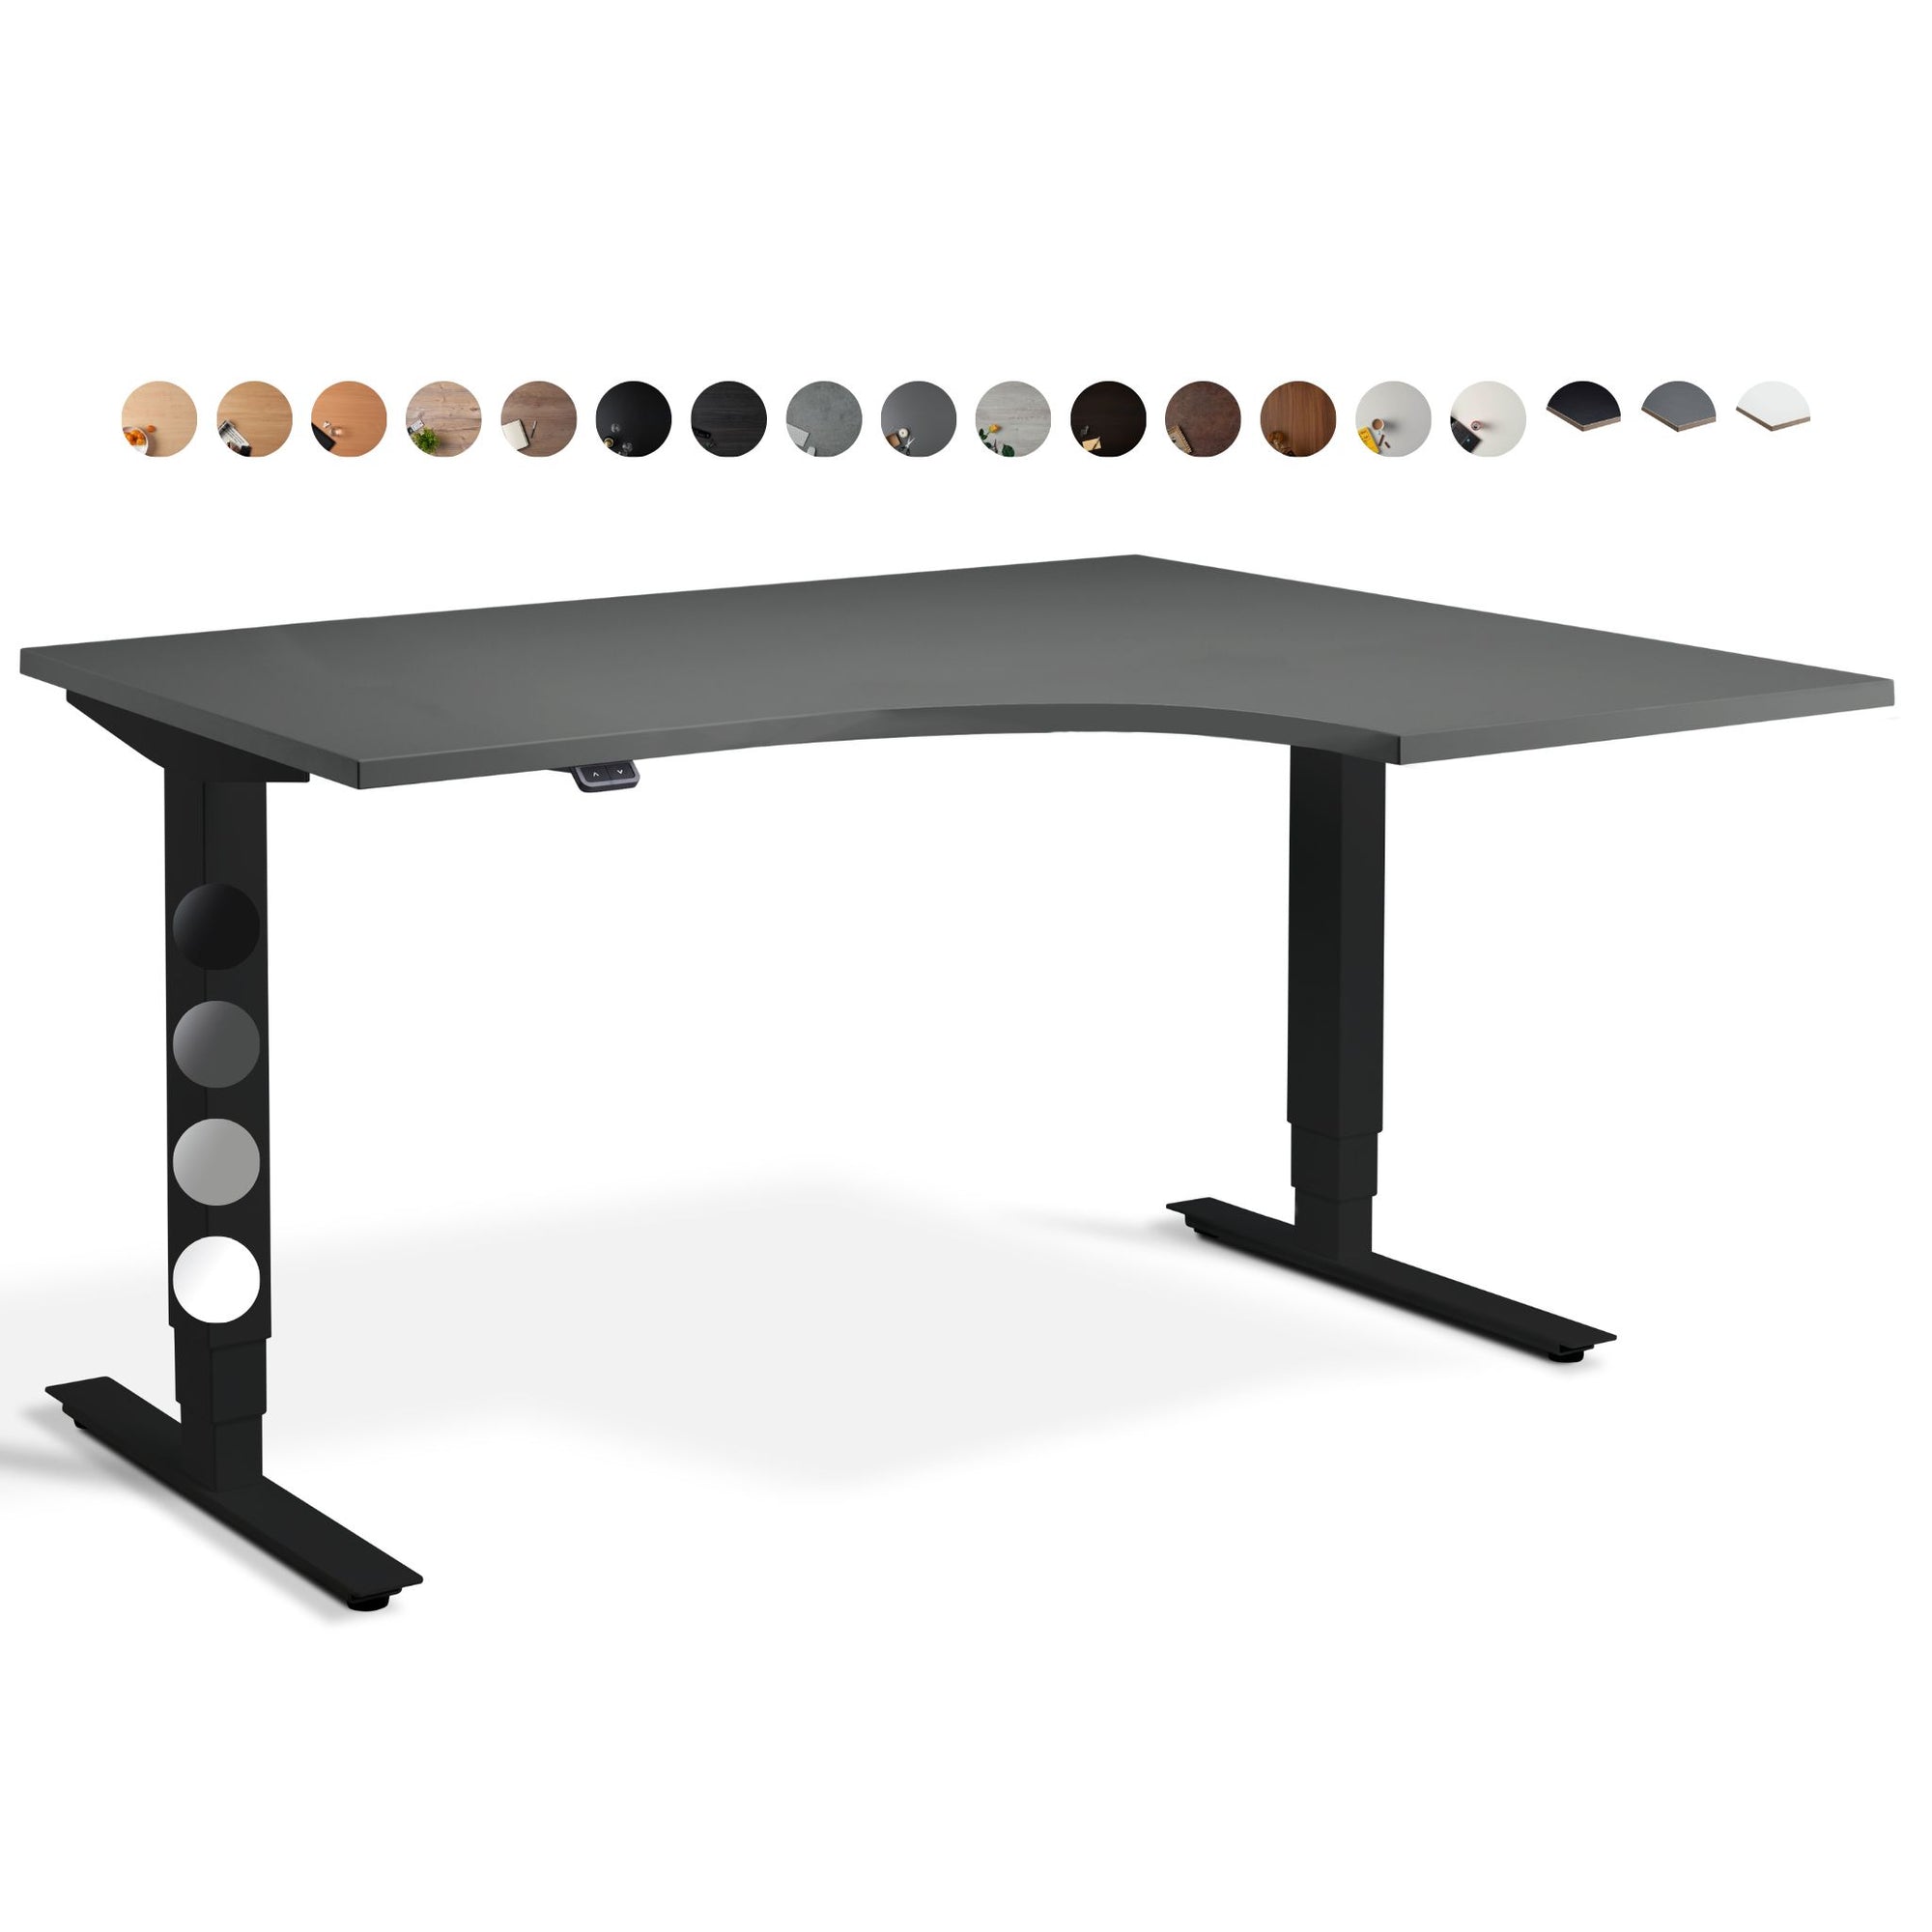 Masta 2 leg radial standing desk available in multiple top and frame finishes